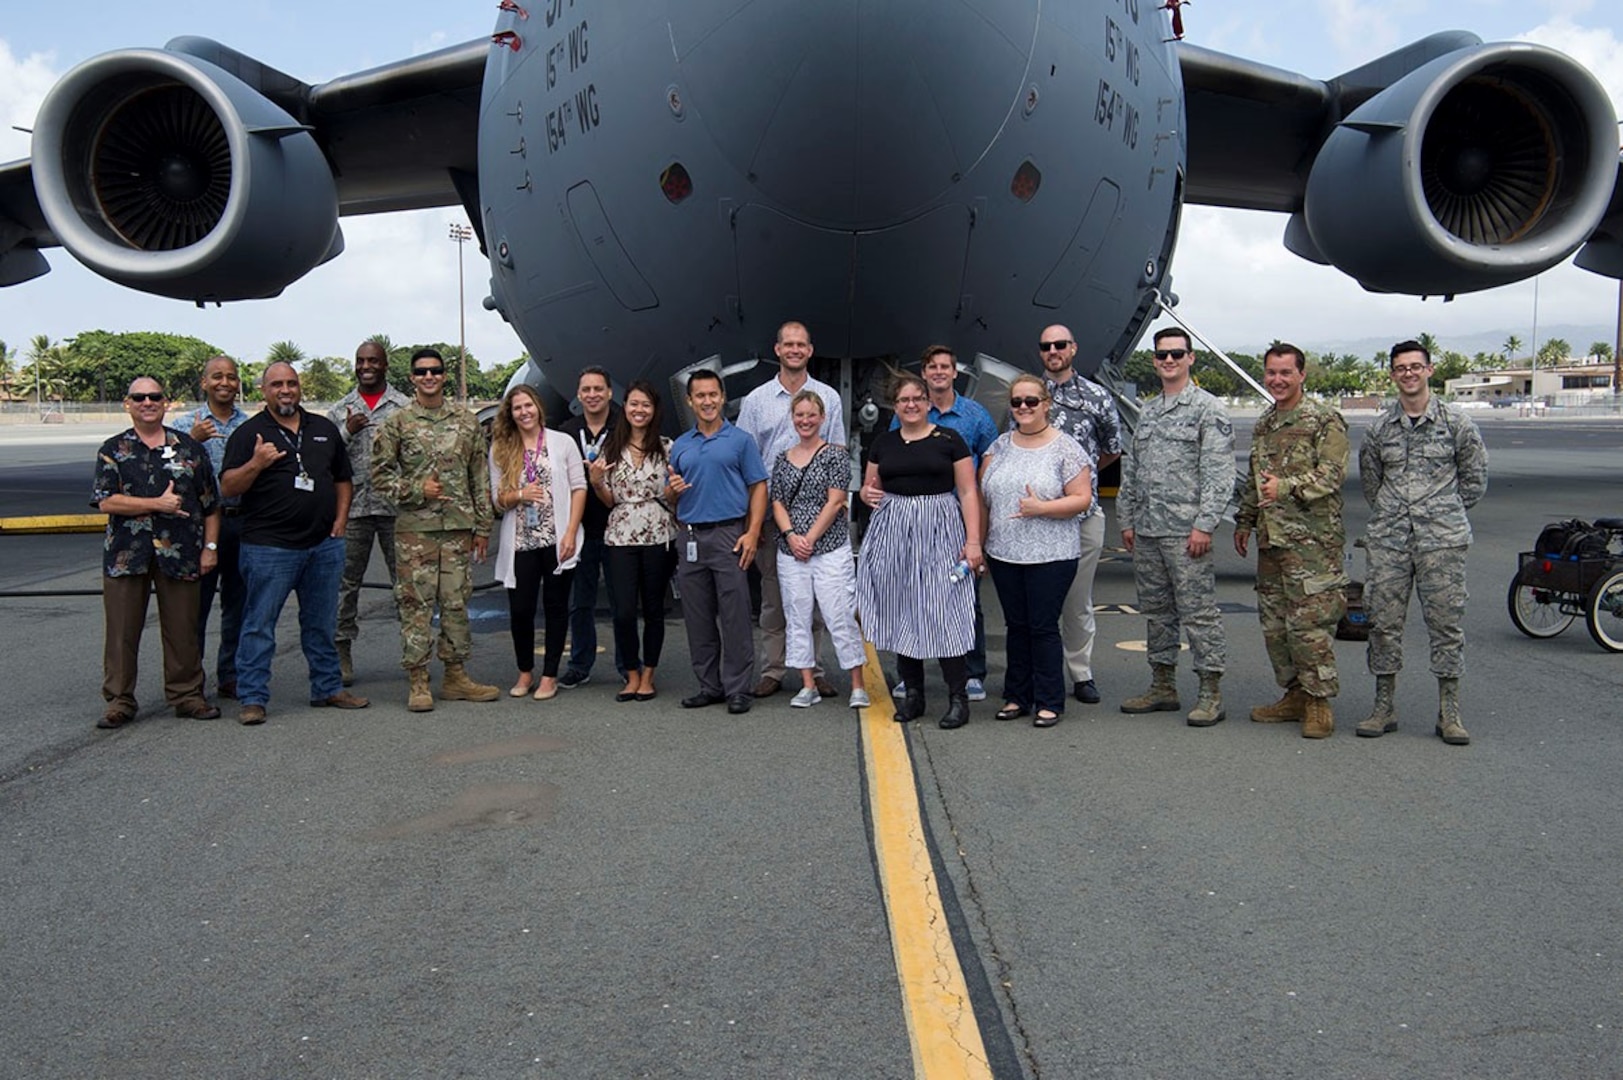 Airmen assigned to the 15th Aircraft Maintenance Squadron and Hawaiian Airlines maintainers pose for a photo in front of a C-17 Globemaster III on Joint Base Pearl Harbor-Hickam, Hawaii April 12, 2019. The 15th AMXS hosted Hawaiian Airlines as part of a continuous process improvement event to talk shop about maintenance, both military and civilian. (U.S. Air Force photo by 2nd Lt. Amber R. Kelly-Herard)